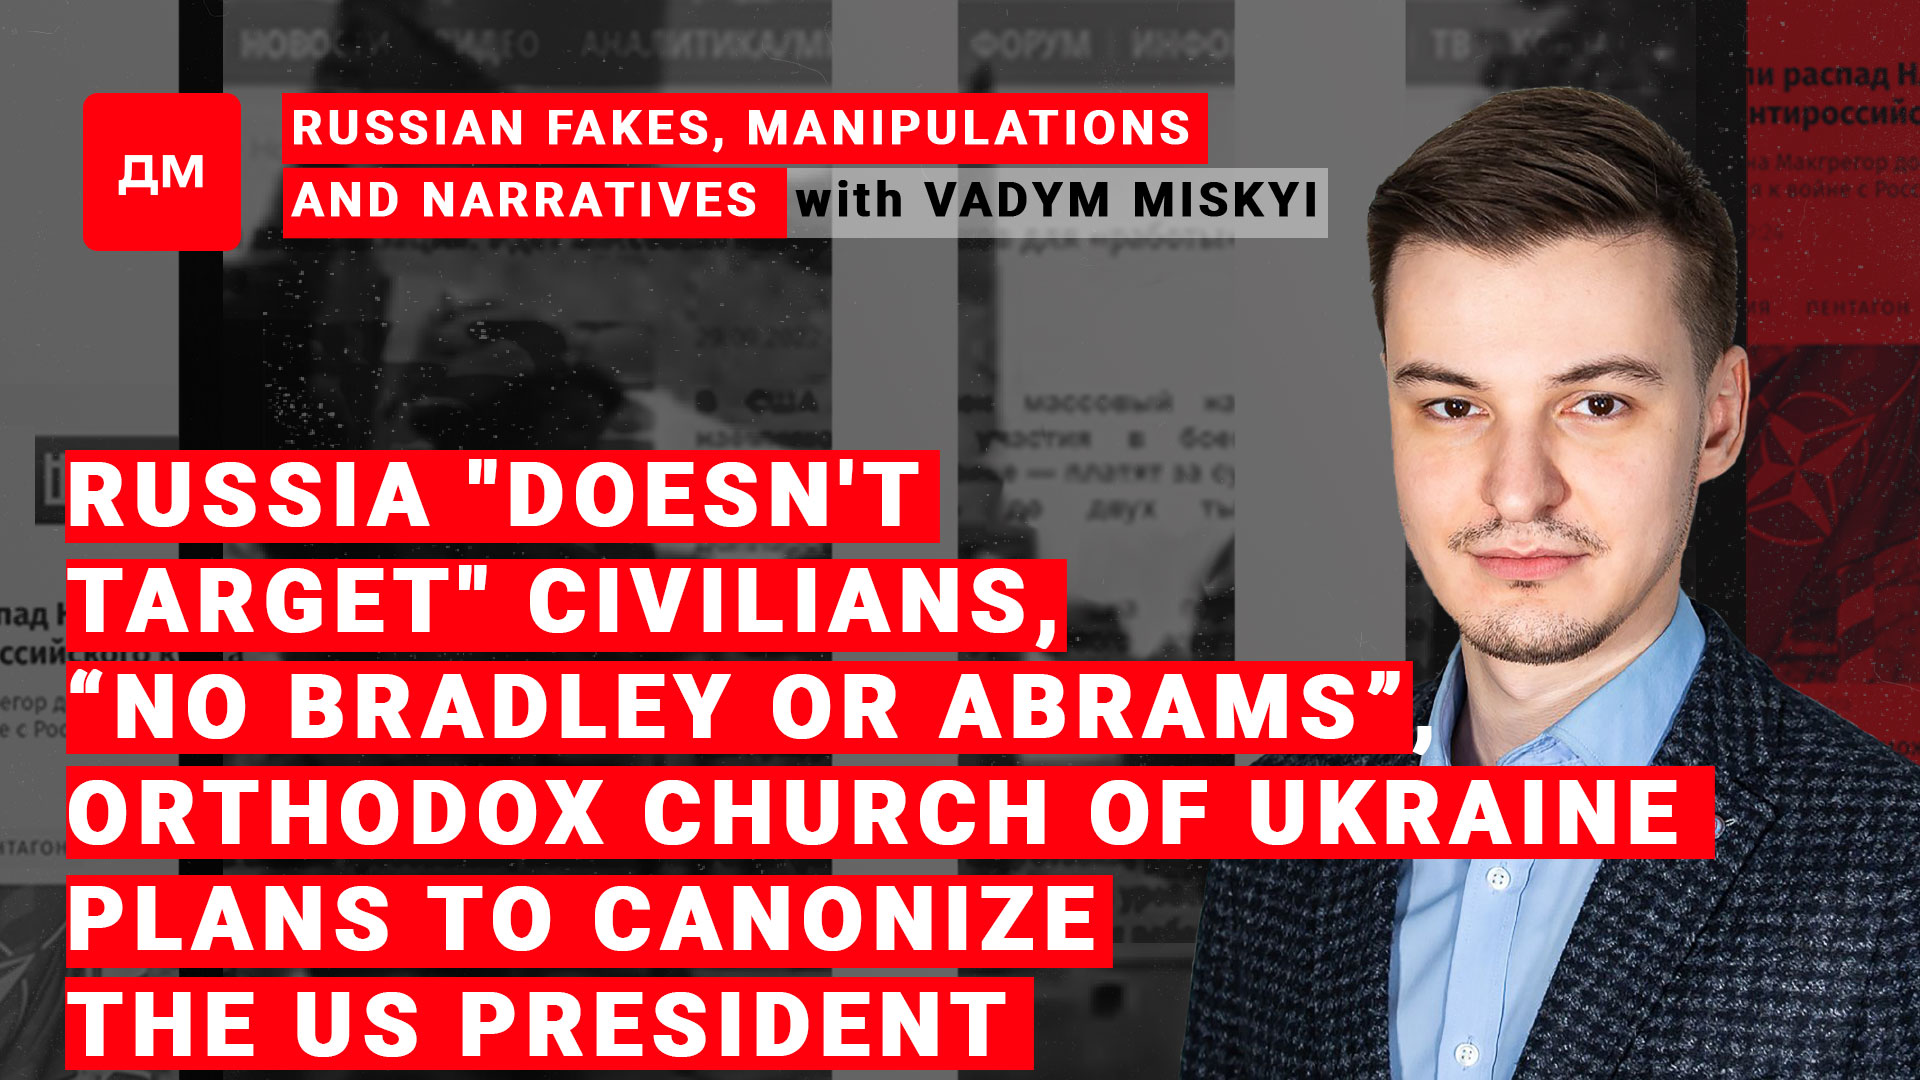 Image: Russian fakes, manipulations and narratives / Briefing by Vadym Miskyi #19